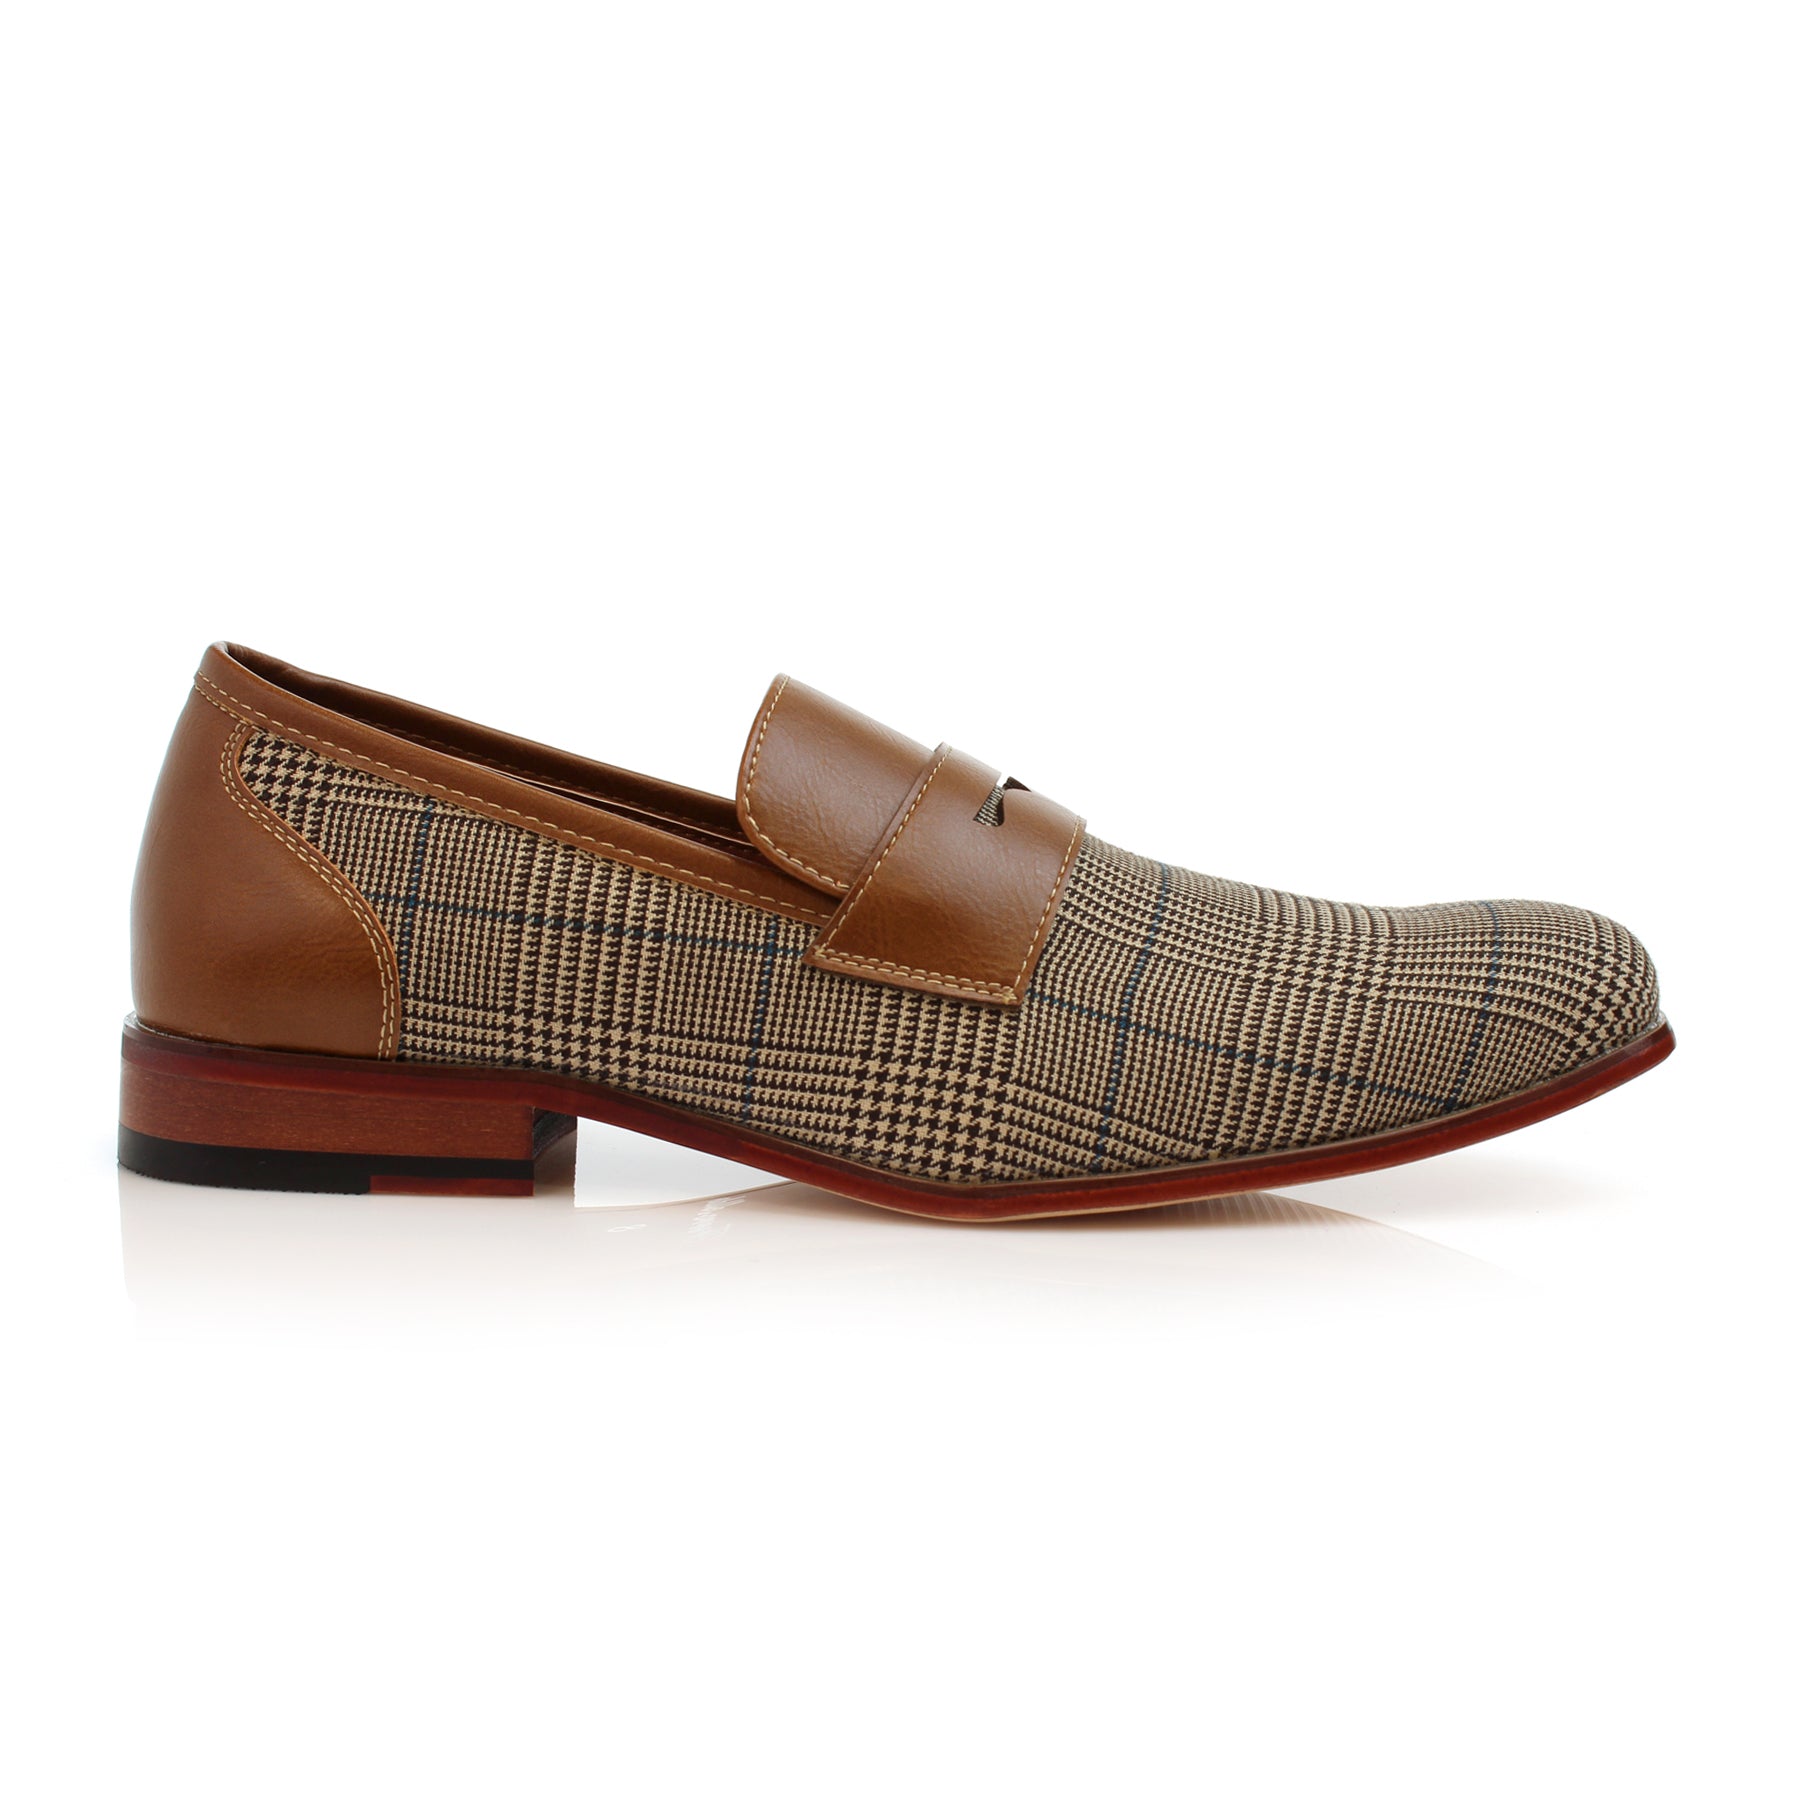 Plaid Loafers | Sidney by Ferro Aldo | Conal Footwear | Outer Side Angle View